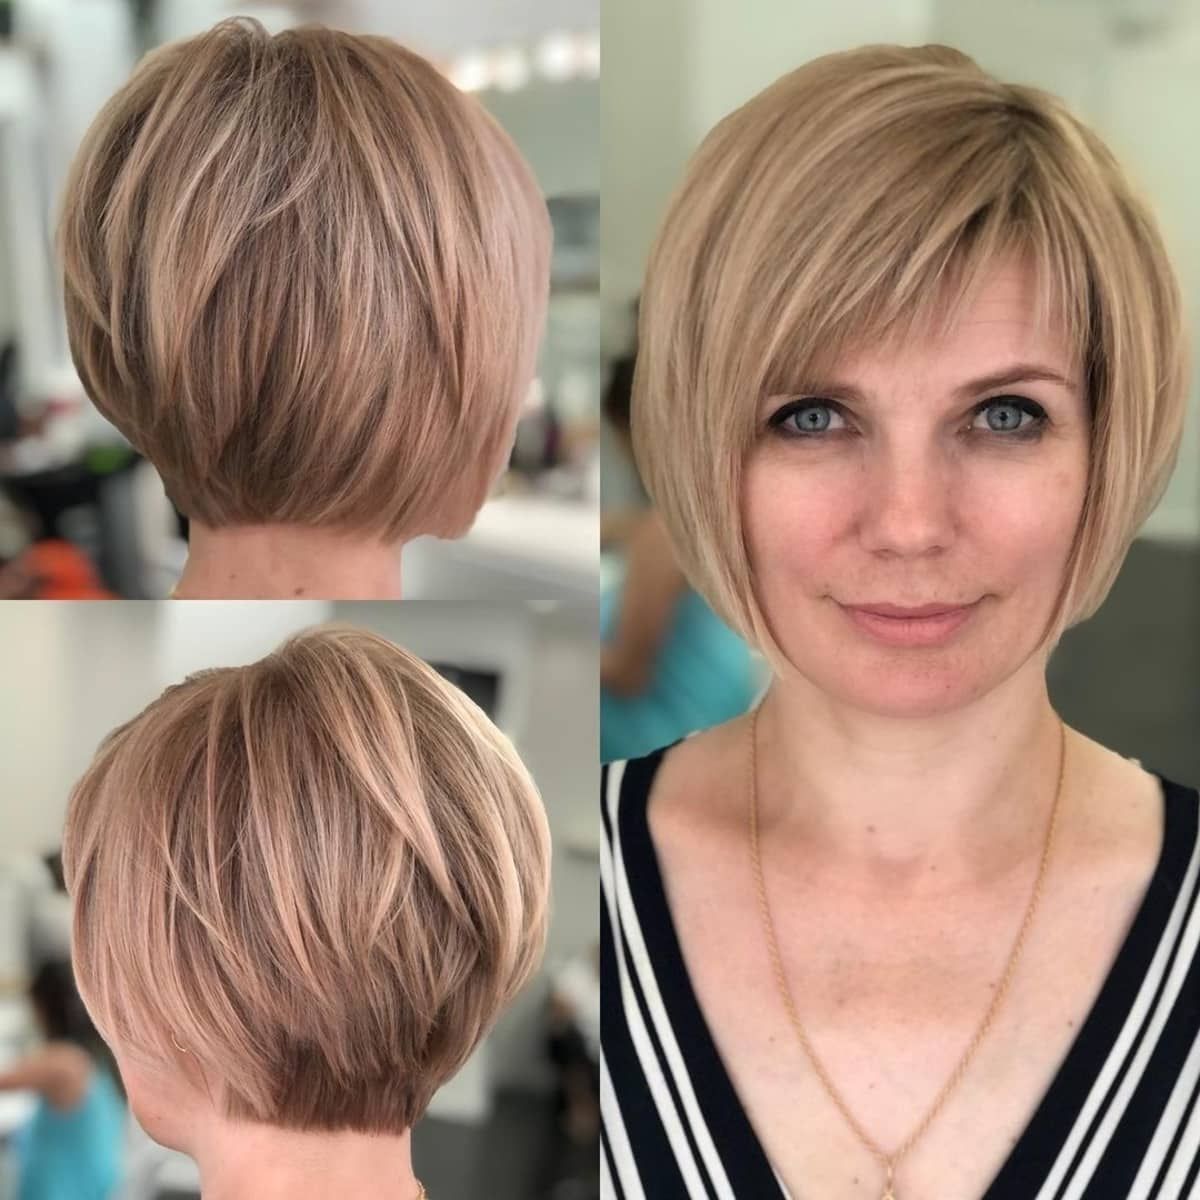 35 Prettiest Chin Length Hair Ideas You Can Easily Style At Home Regarding Chin Length Graduated Bob Hairstyles (View 6 of 20)